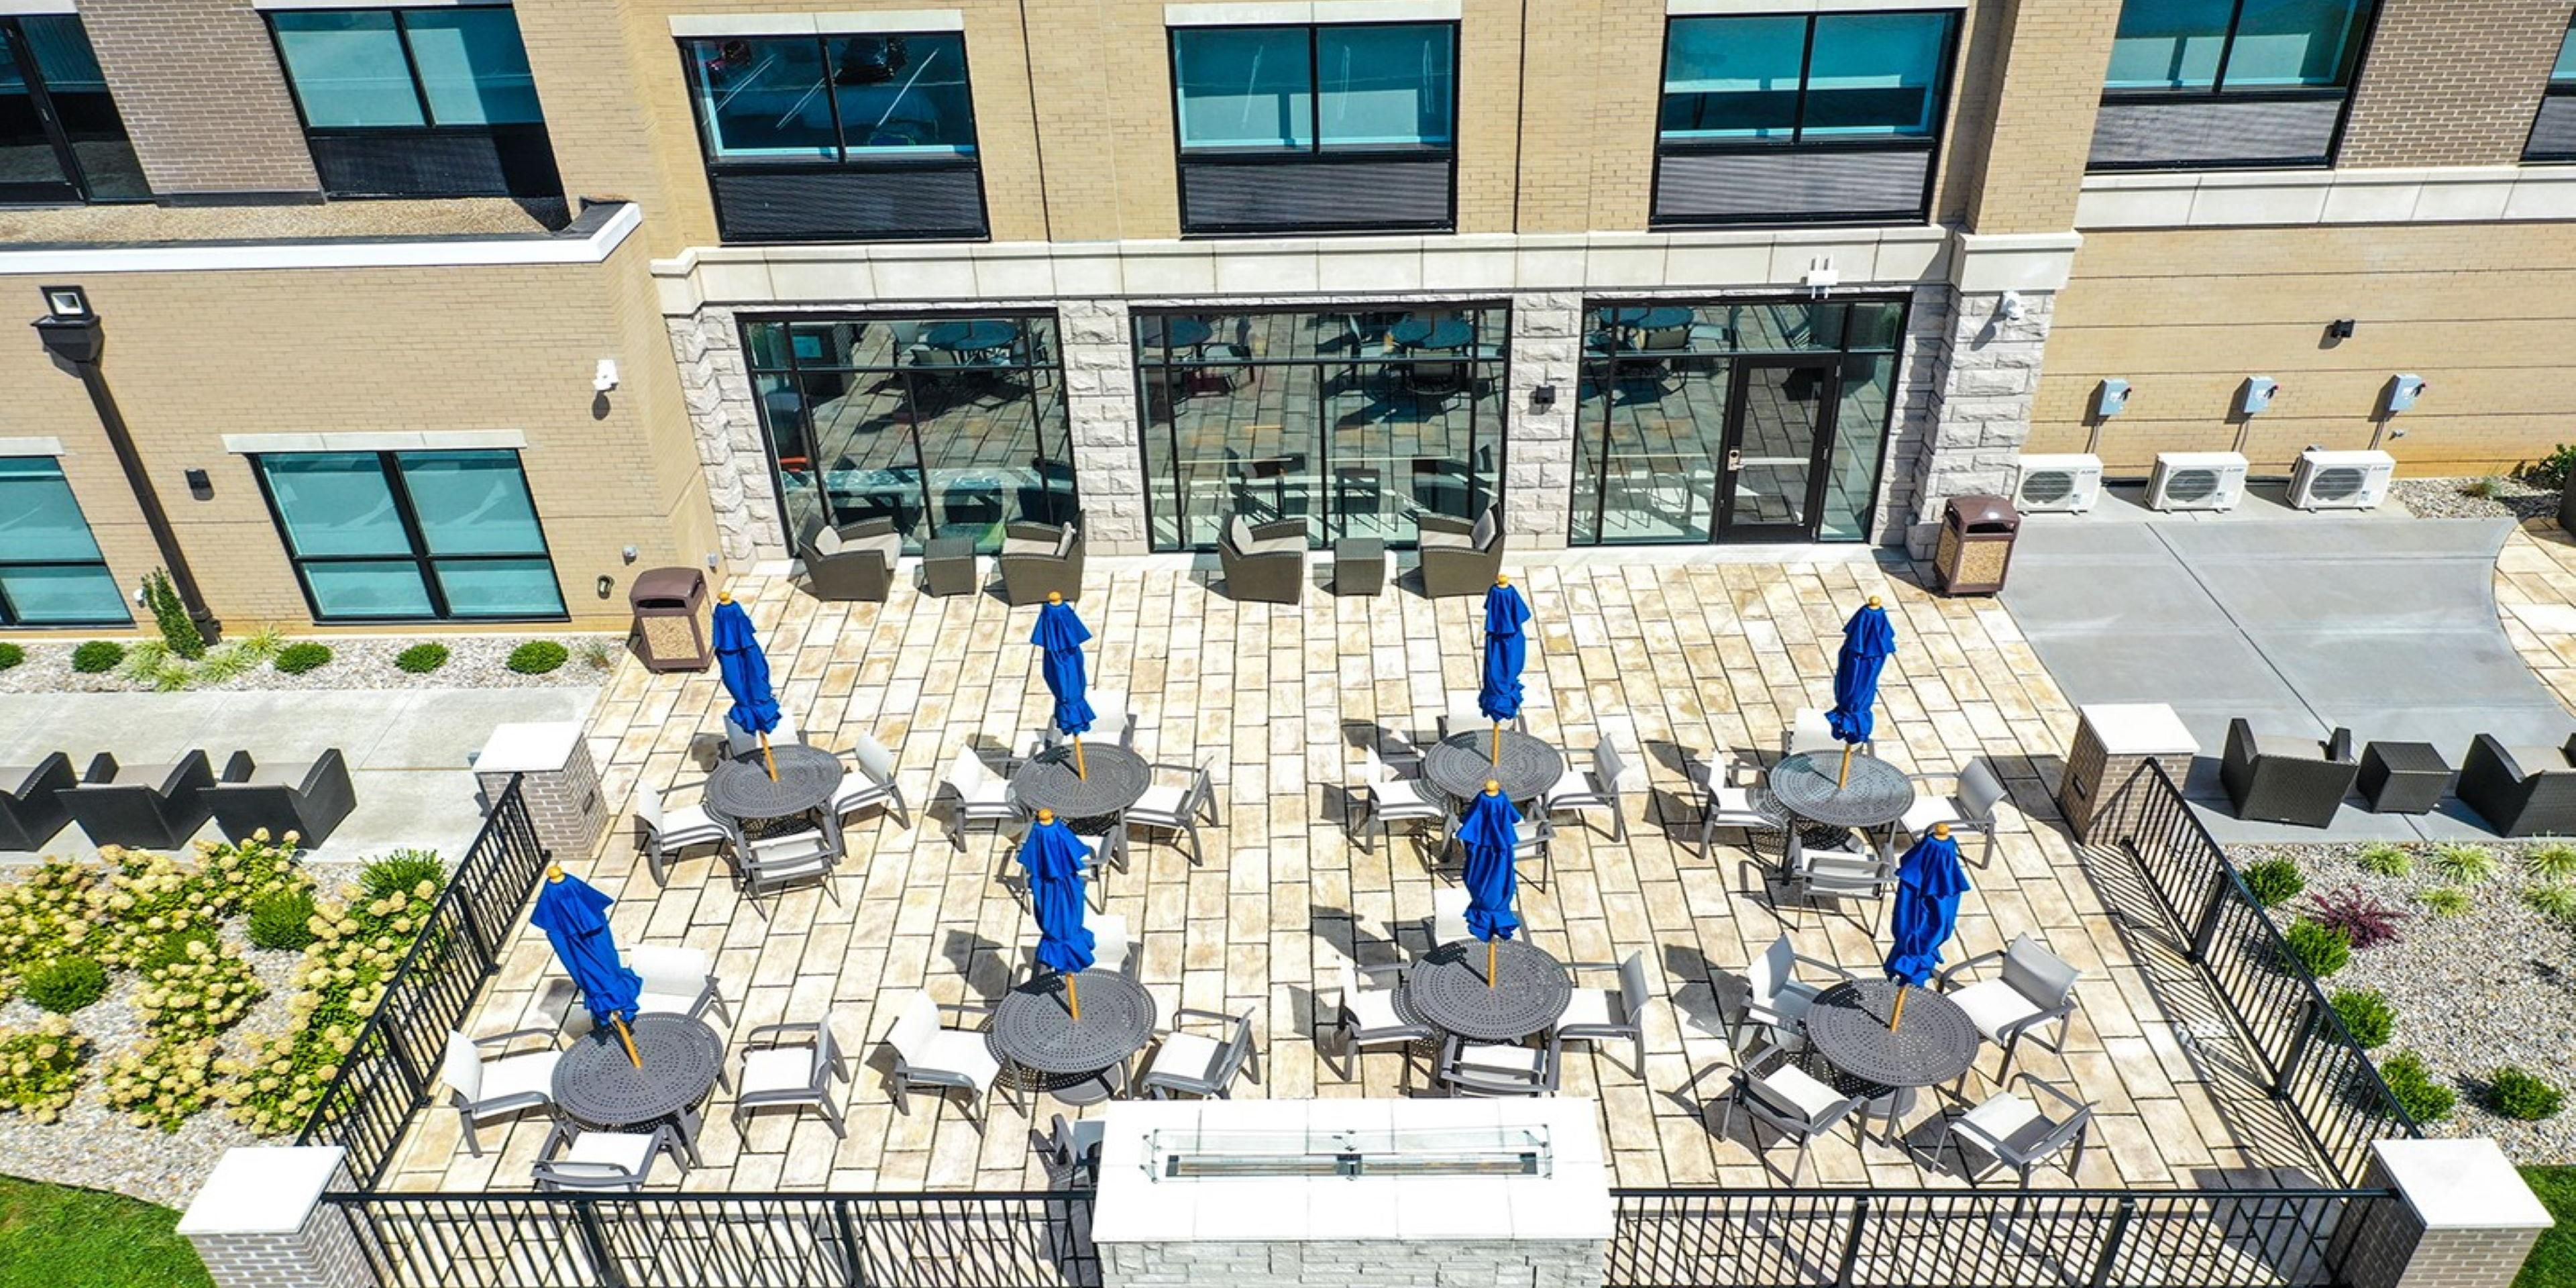 Gather with your friends and family at our outdoor patio with plenty of tables and seating with umbrellas to keep you cool.